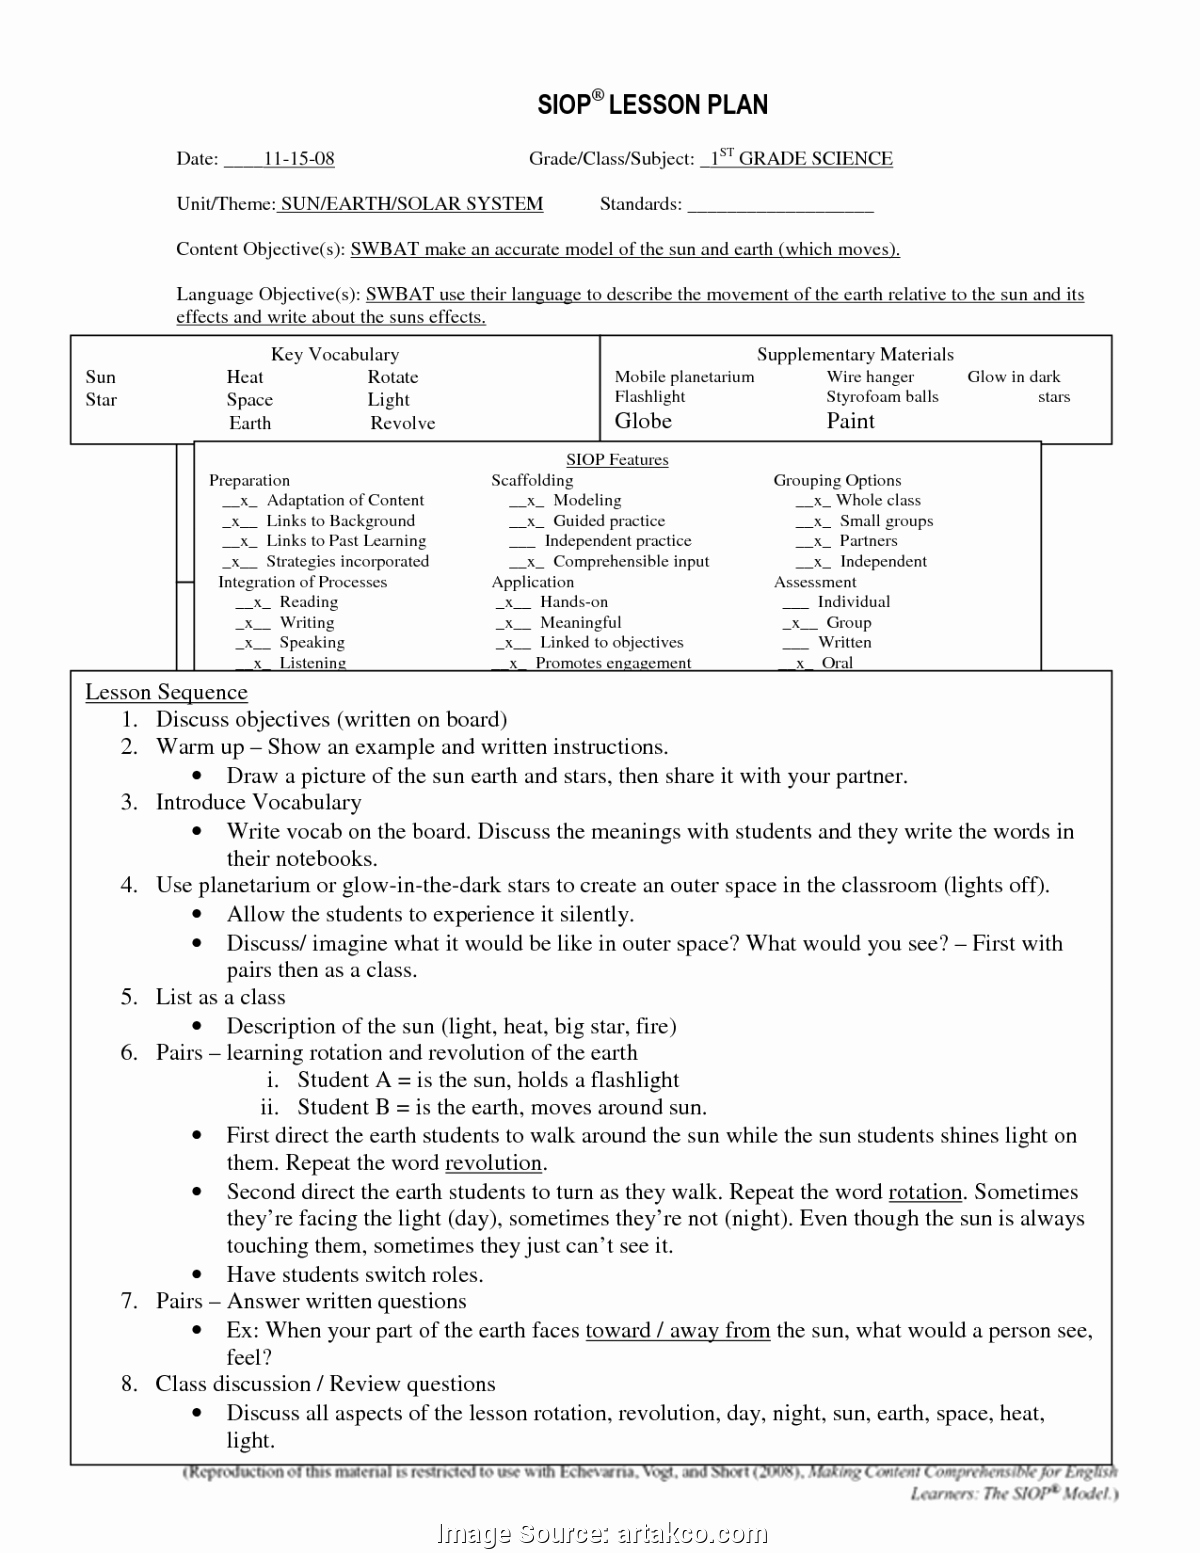 Siop Lesson Plan Template 2 Lovely Fresh Example Siop Lesson Plan Template 3 fortable Siop Lesson Template Ideas Entry